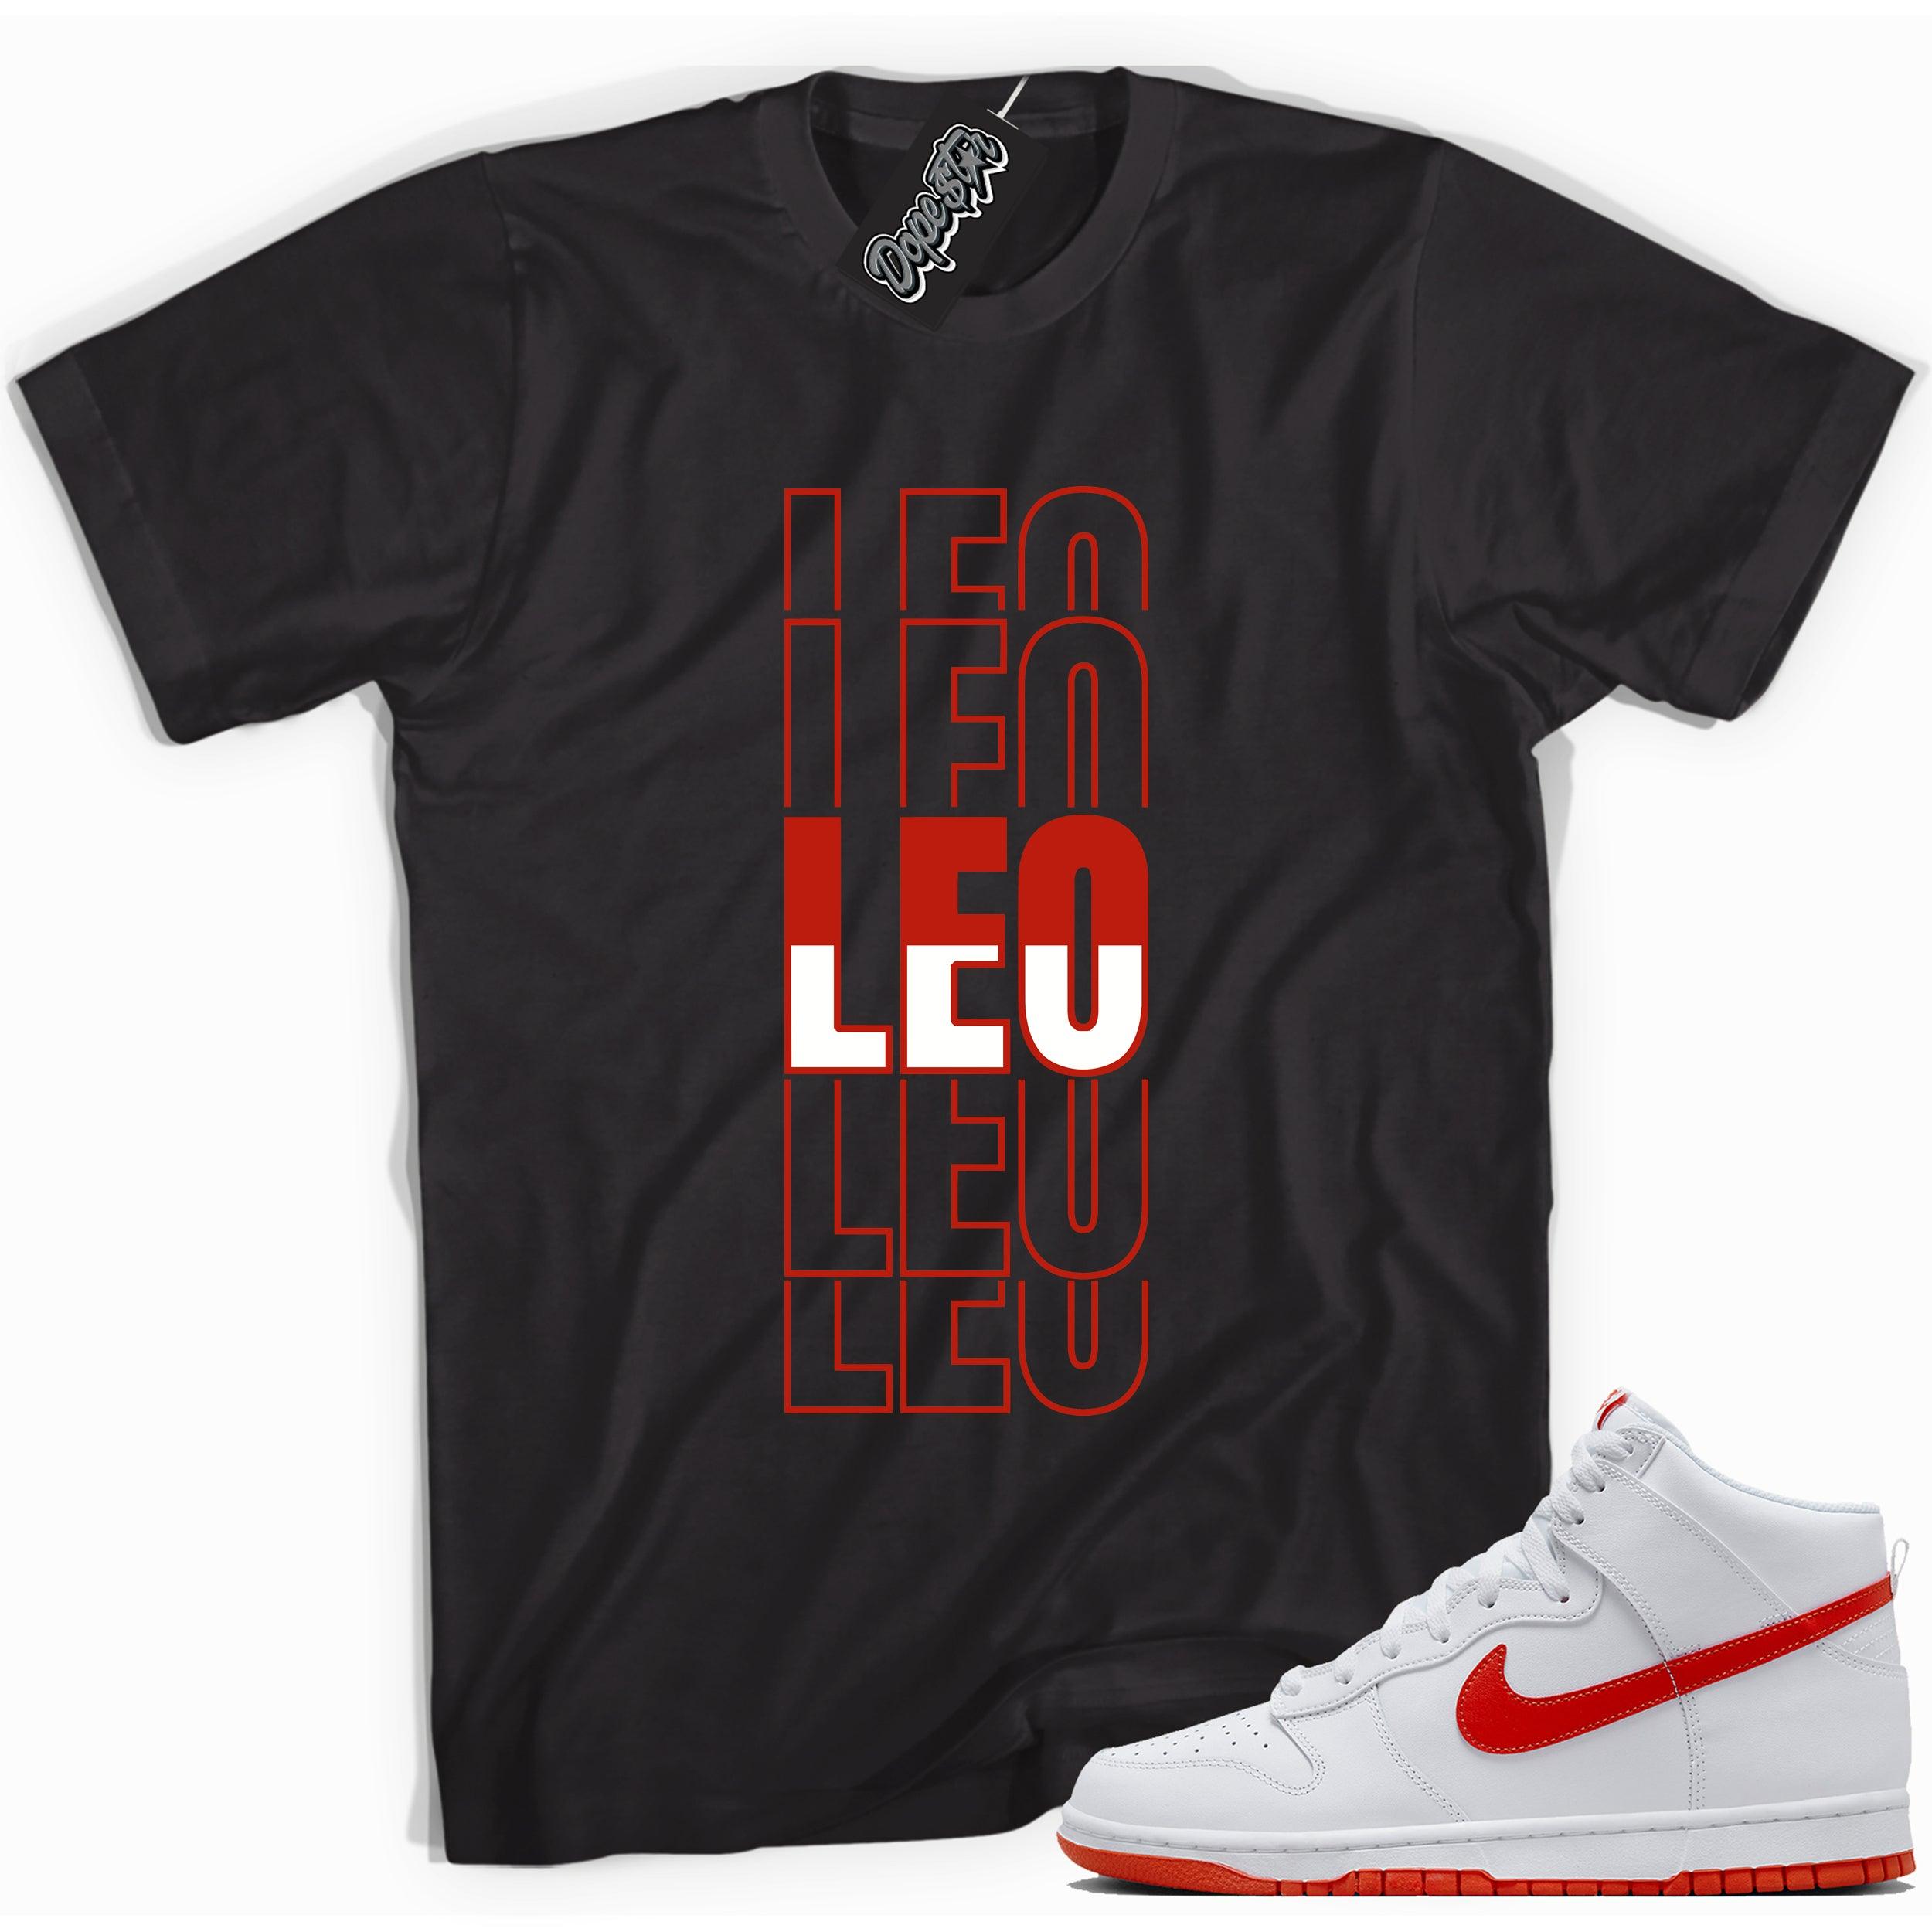 Cool black graphic tee with 'leo' print, that perfectly matches Nike Dunk High White Picante Red sneakers.